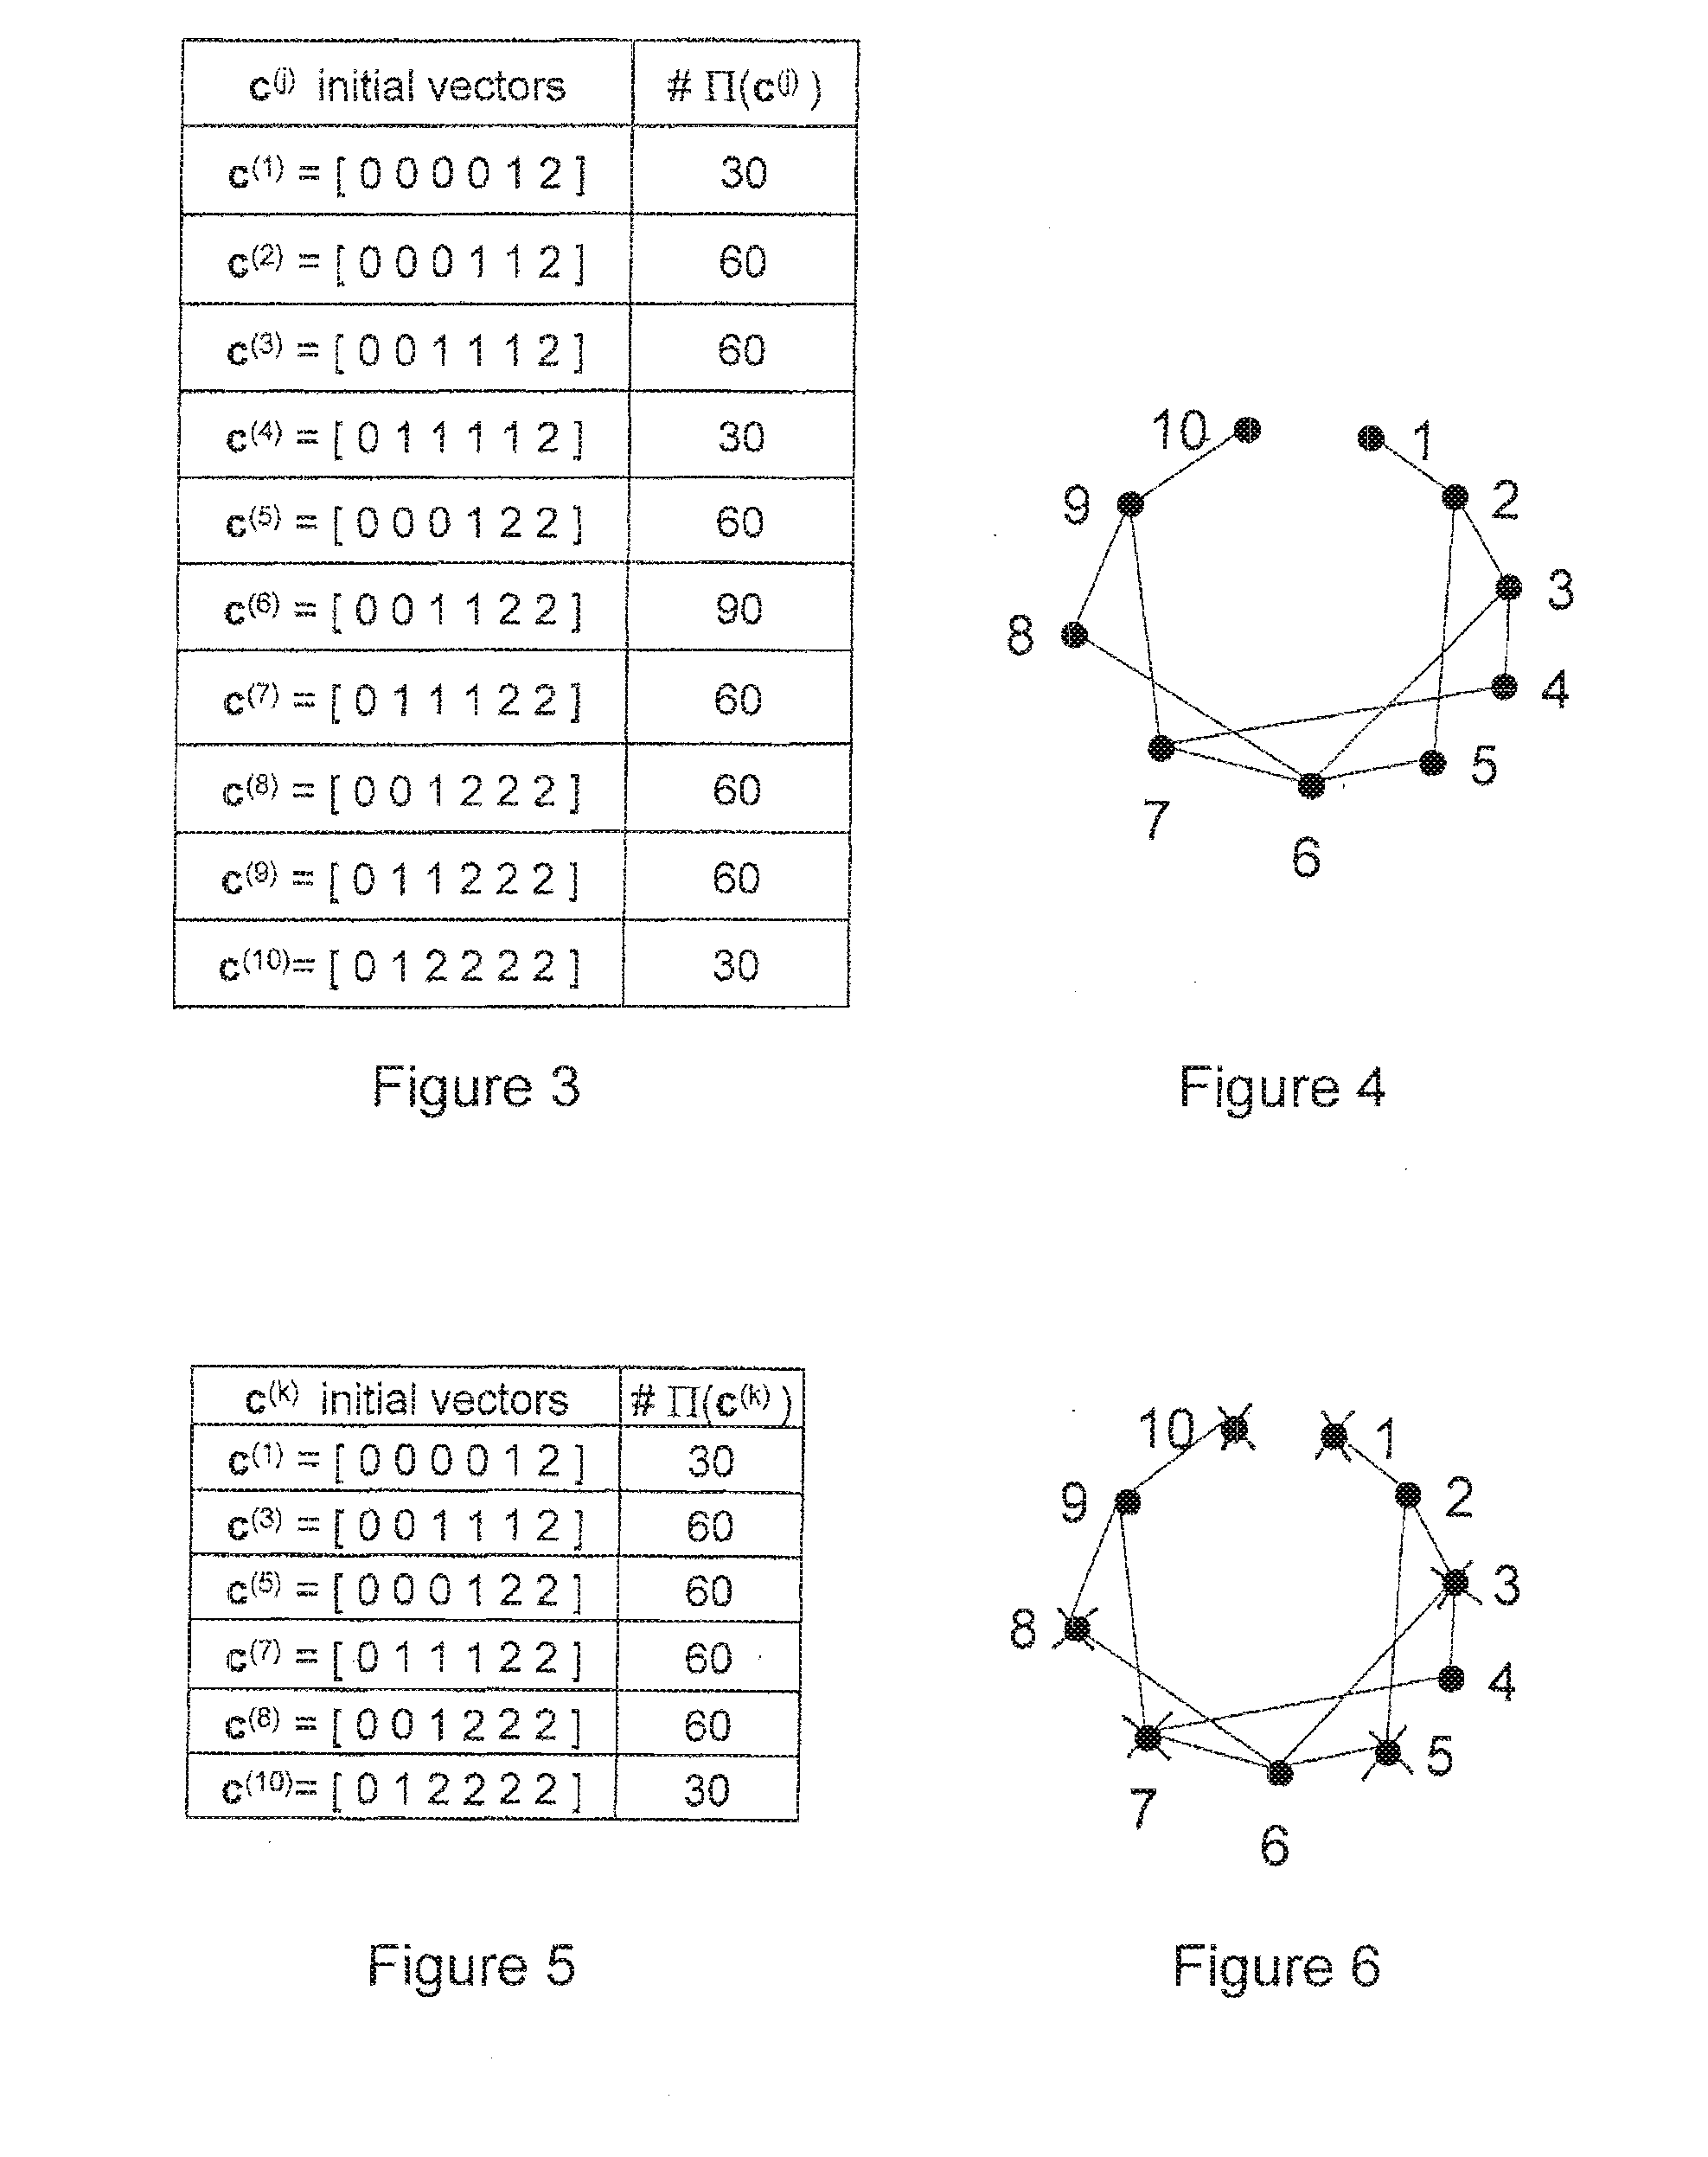 Data encoding in solid-state storage devices